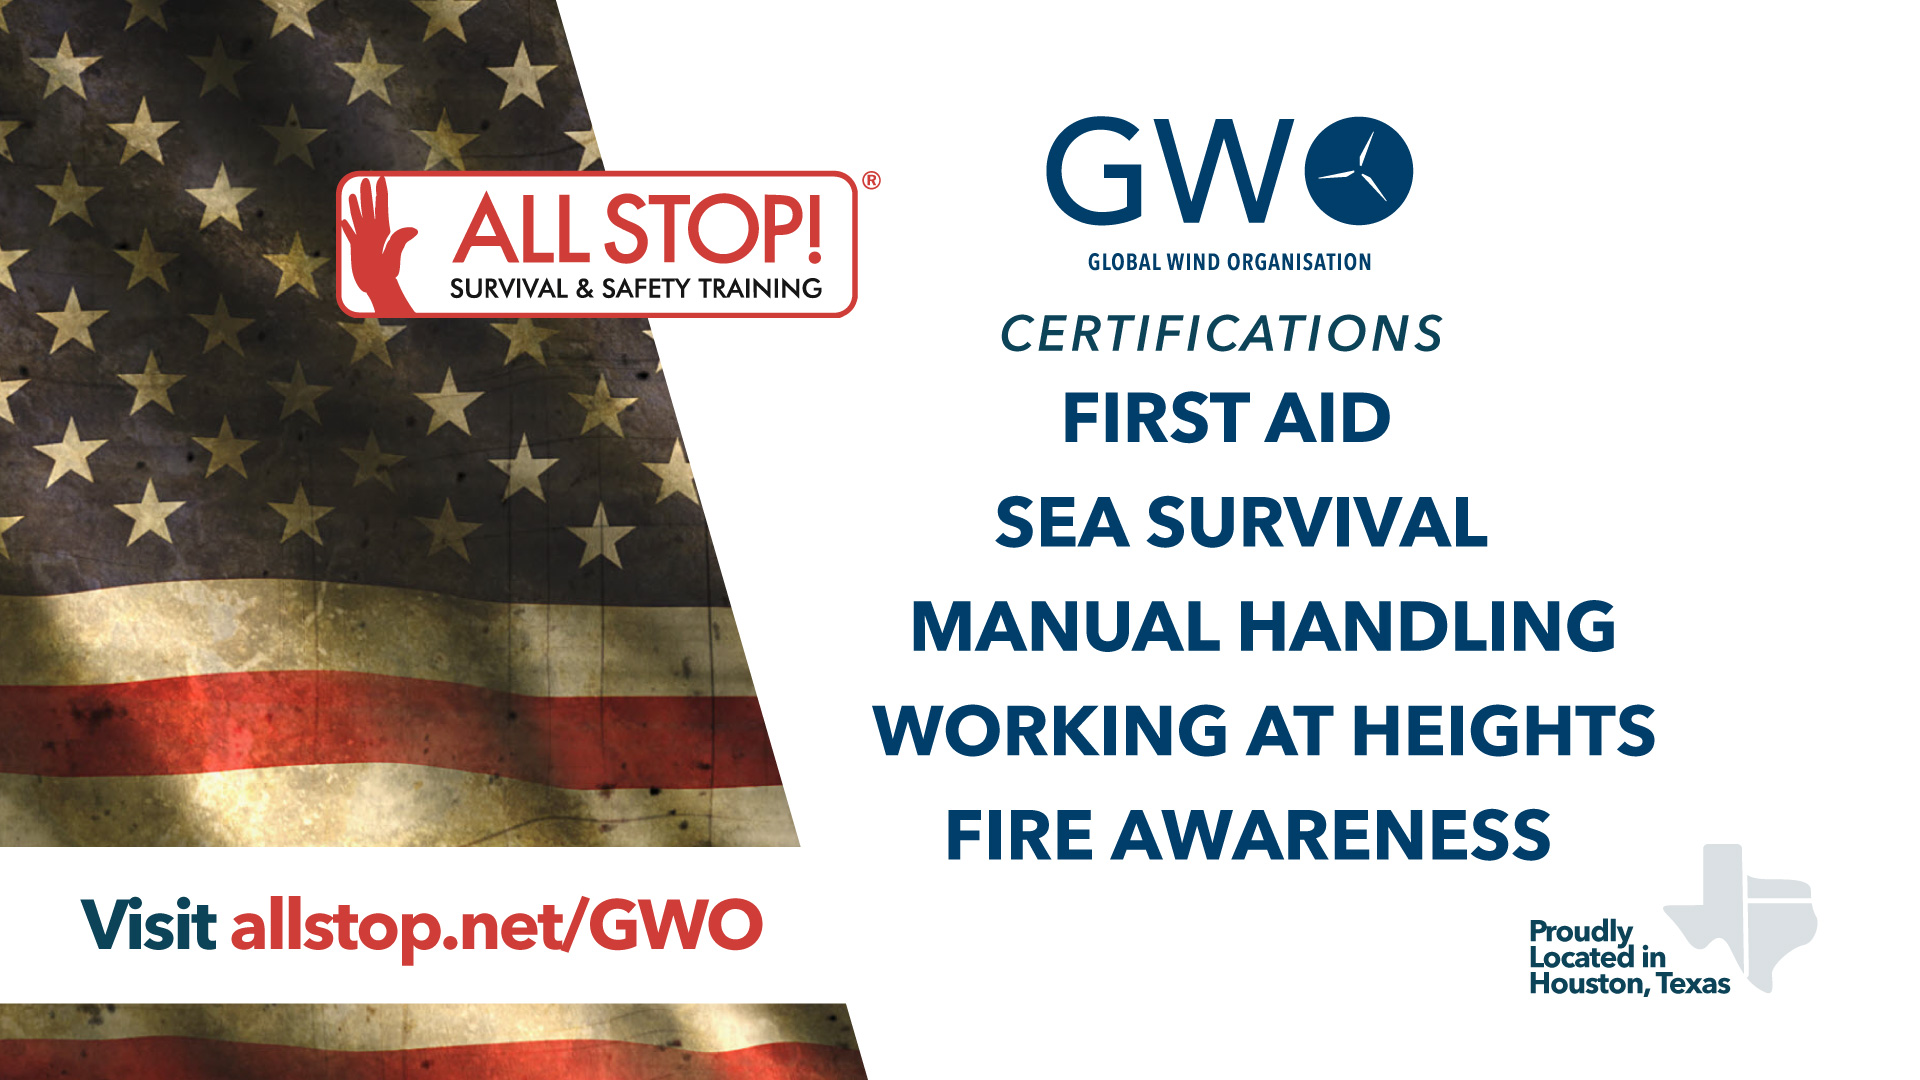 ALL STOP GWO Certification Houston Texas